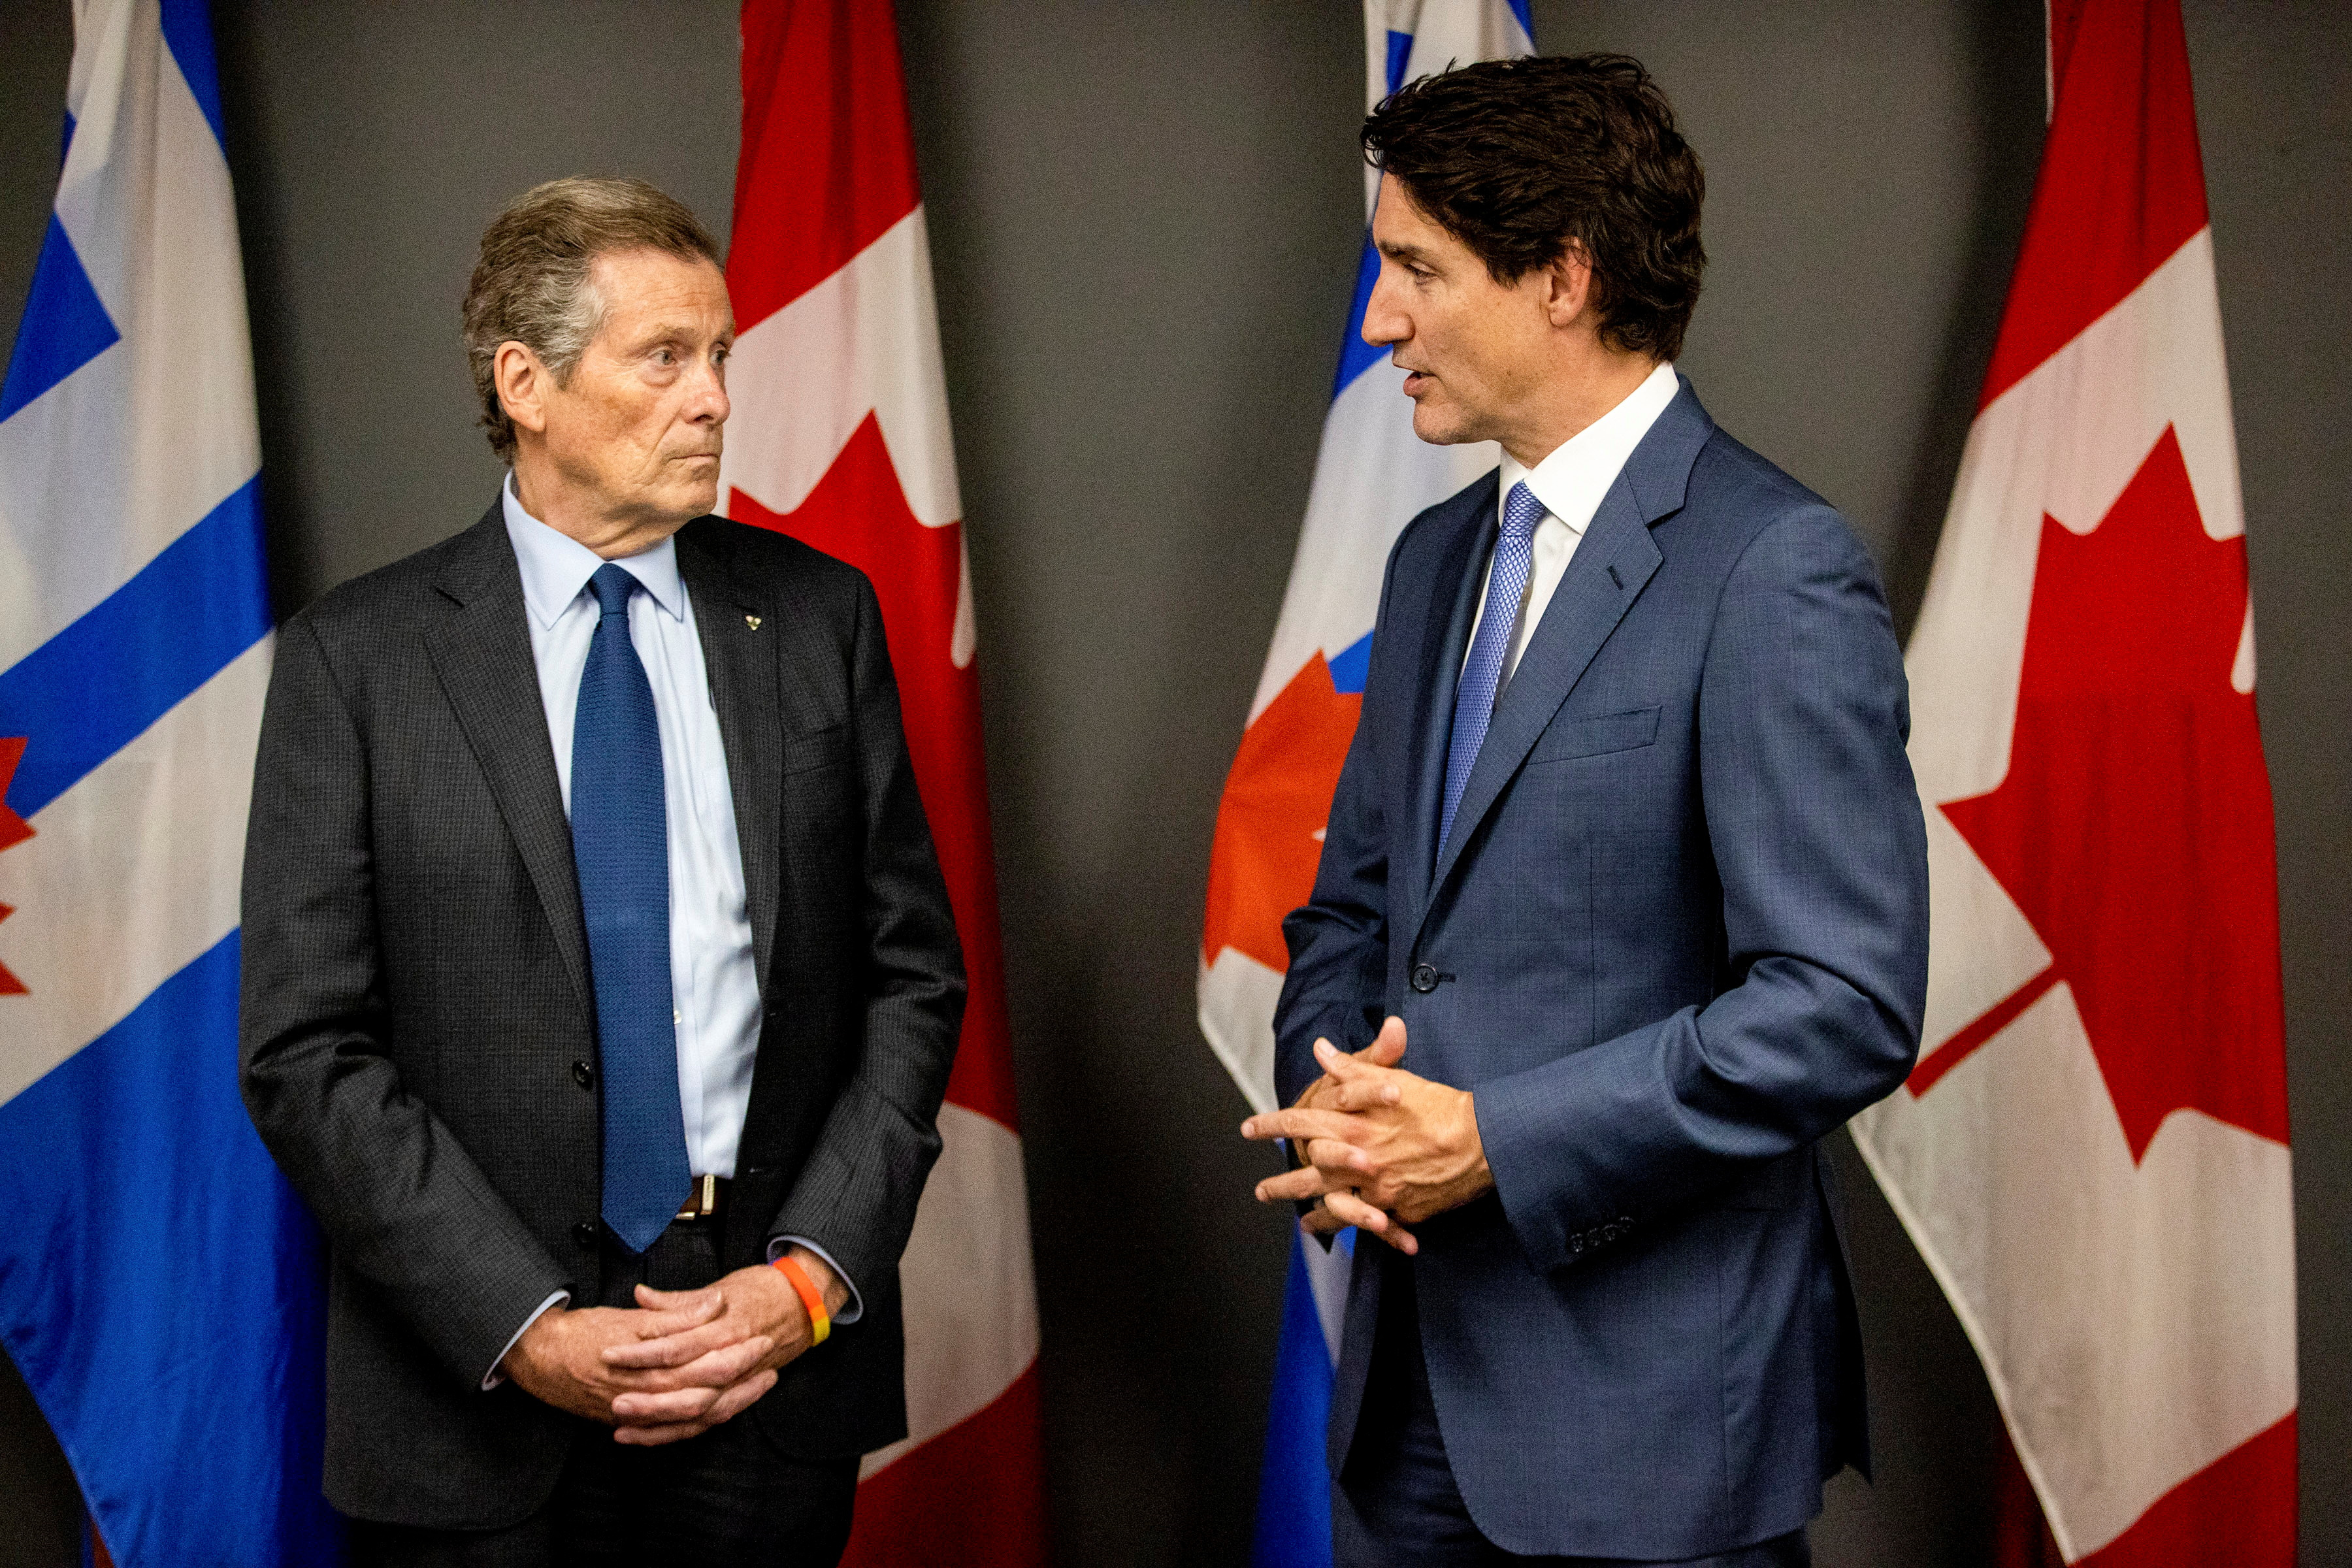 Canada's Prime Minister Justin Trudeau meets with Toronto Mayor John Tory